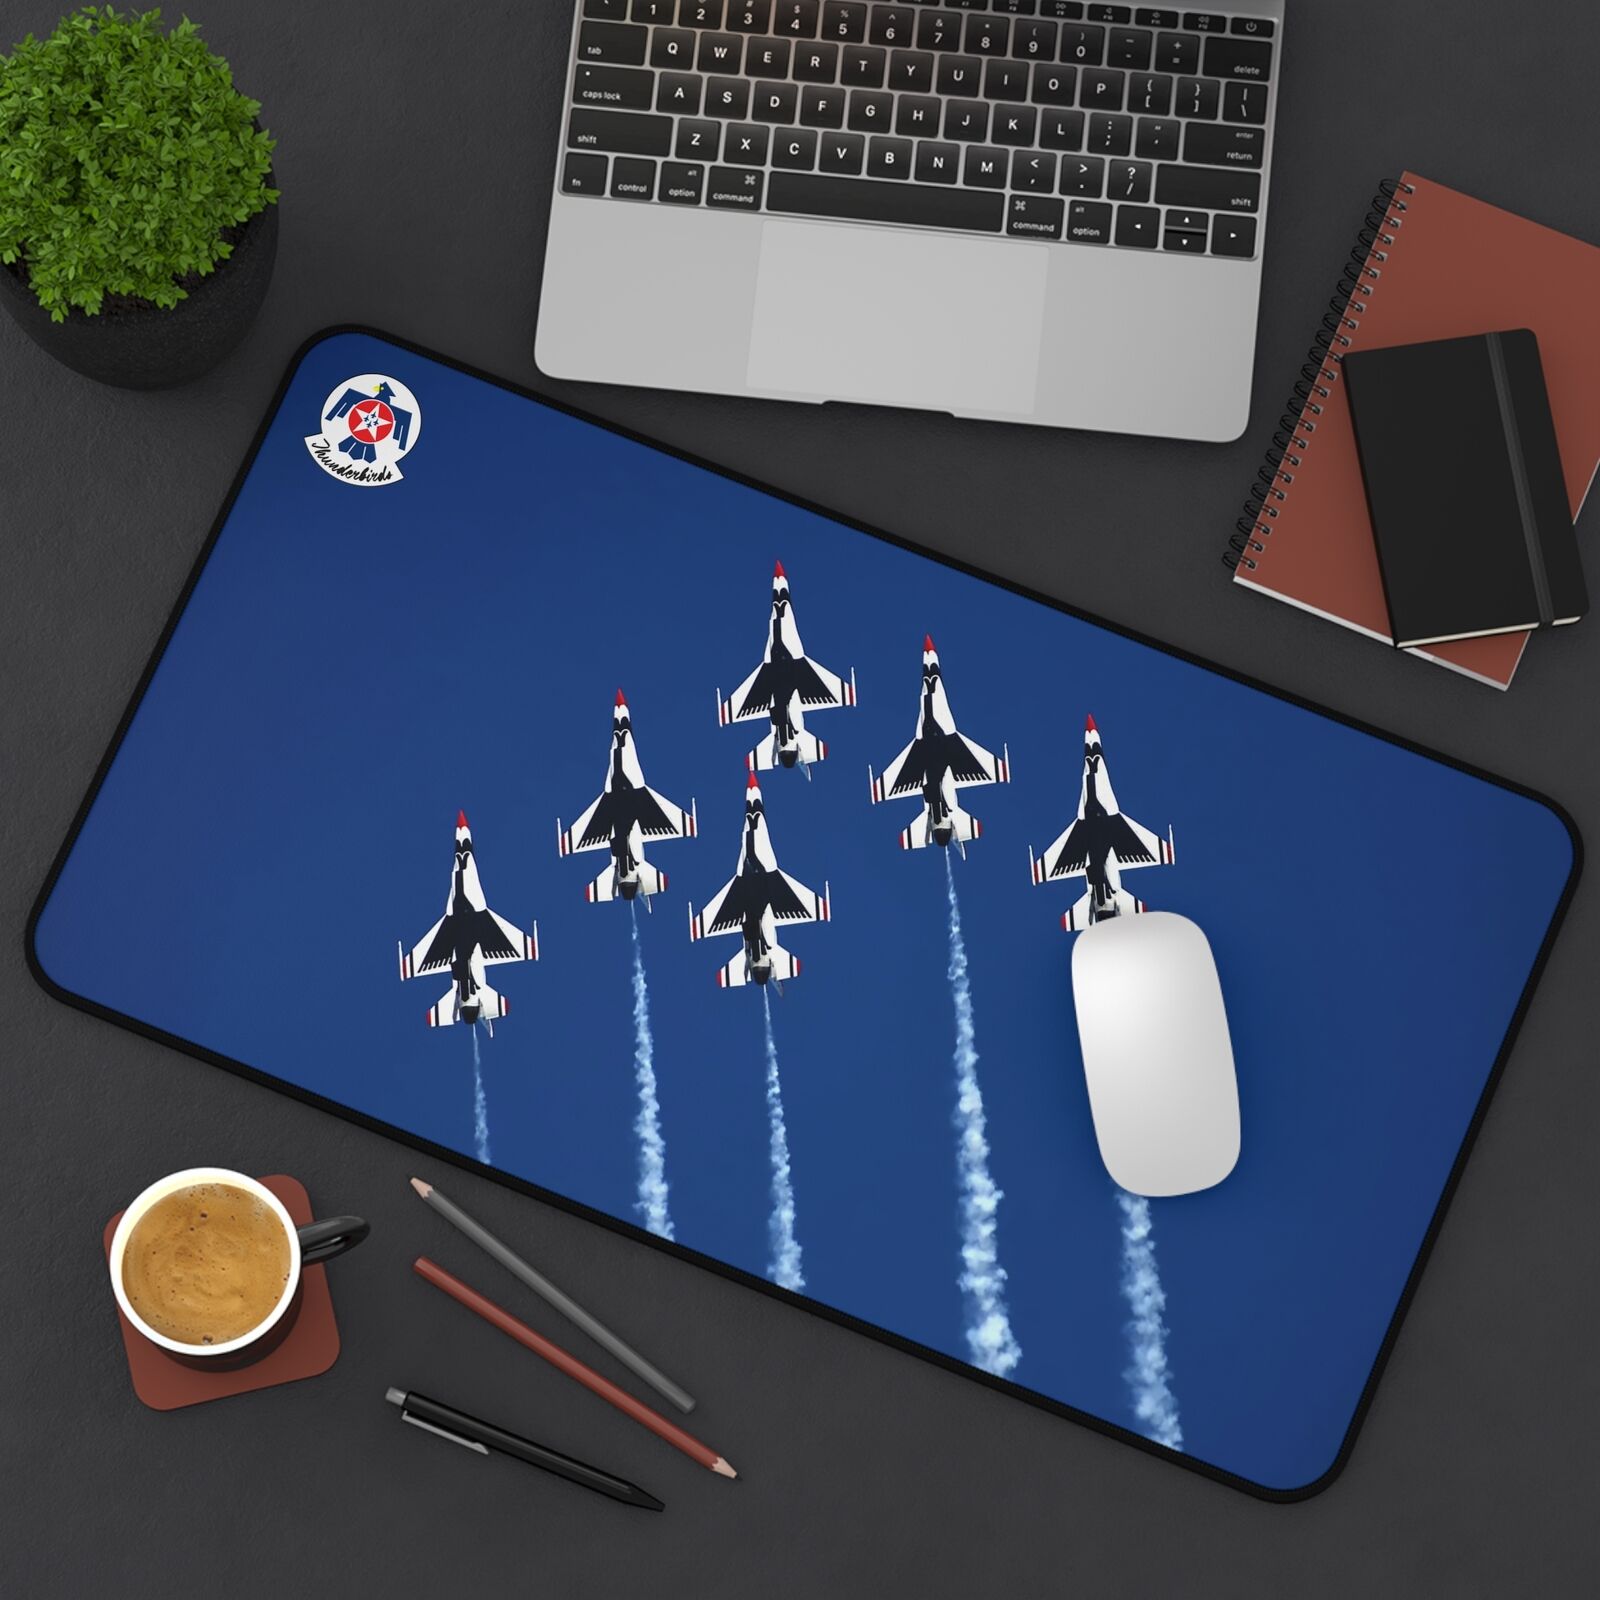 Thunderbirds - United States Air Force USAF Design - Desk Mat Gaming Mouse Pad